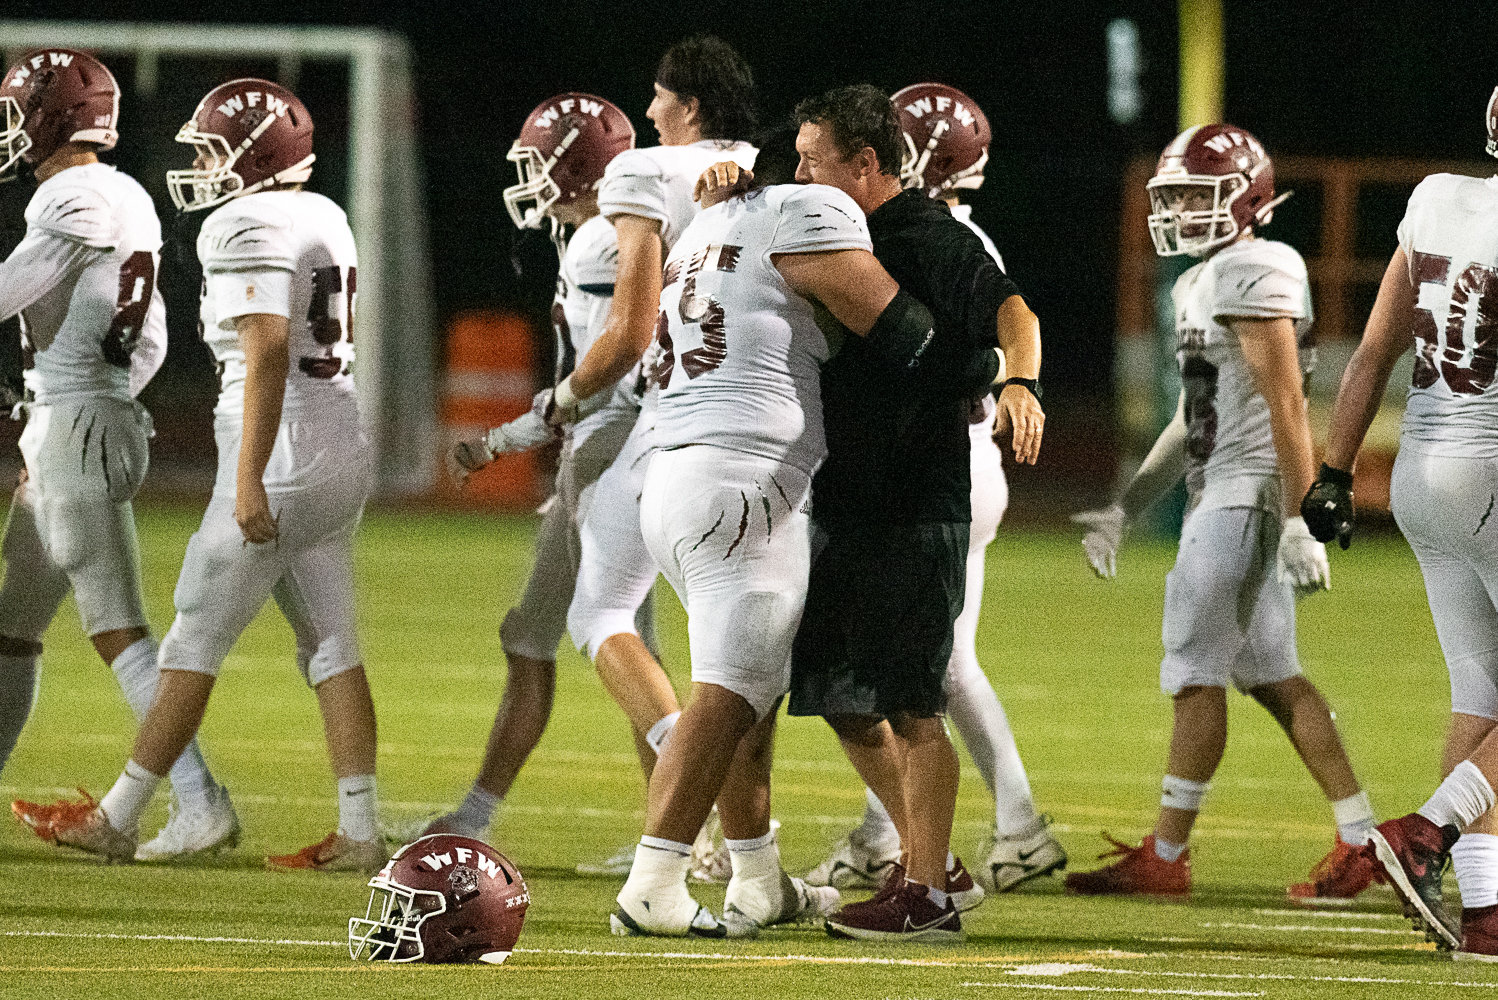 W.F. West coach Dan Hill hugs senior lineman Daniel Matagi after the Bearcats wrapped up their 28-7 win over Tumwater on Sept. 30 at Tumwater District Stadium. The Bearcats hadn't beaten the Thunderbirds since 2009.